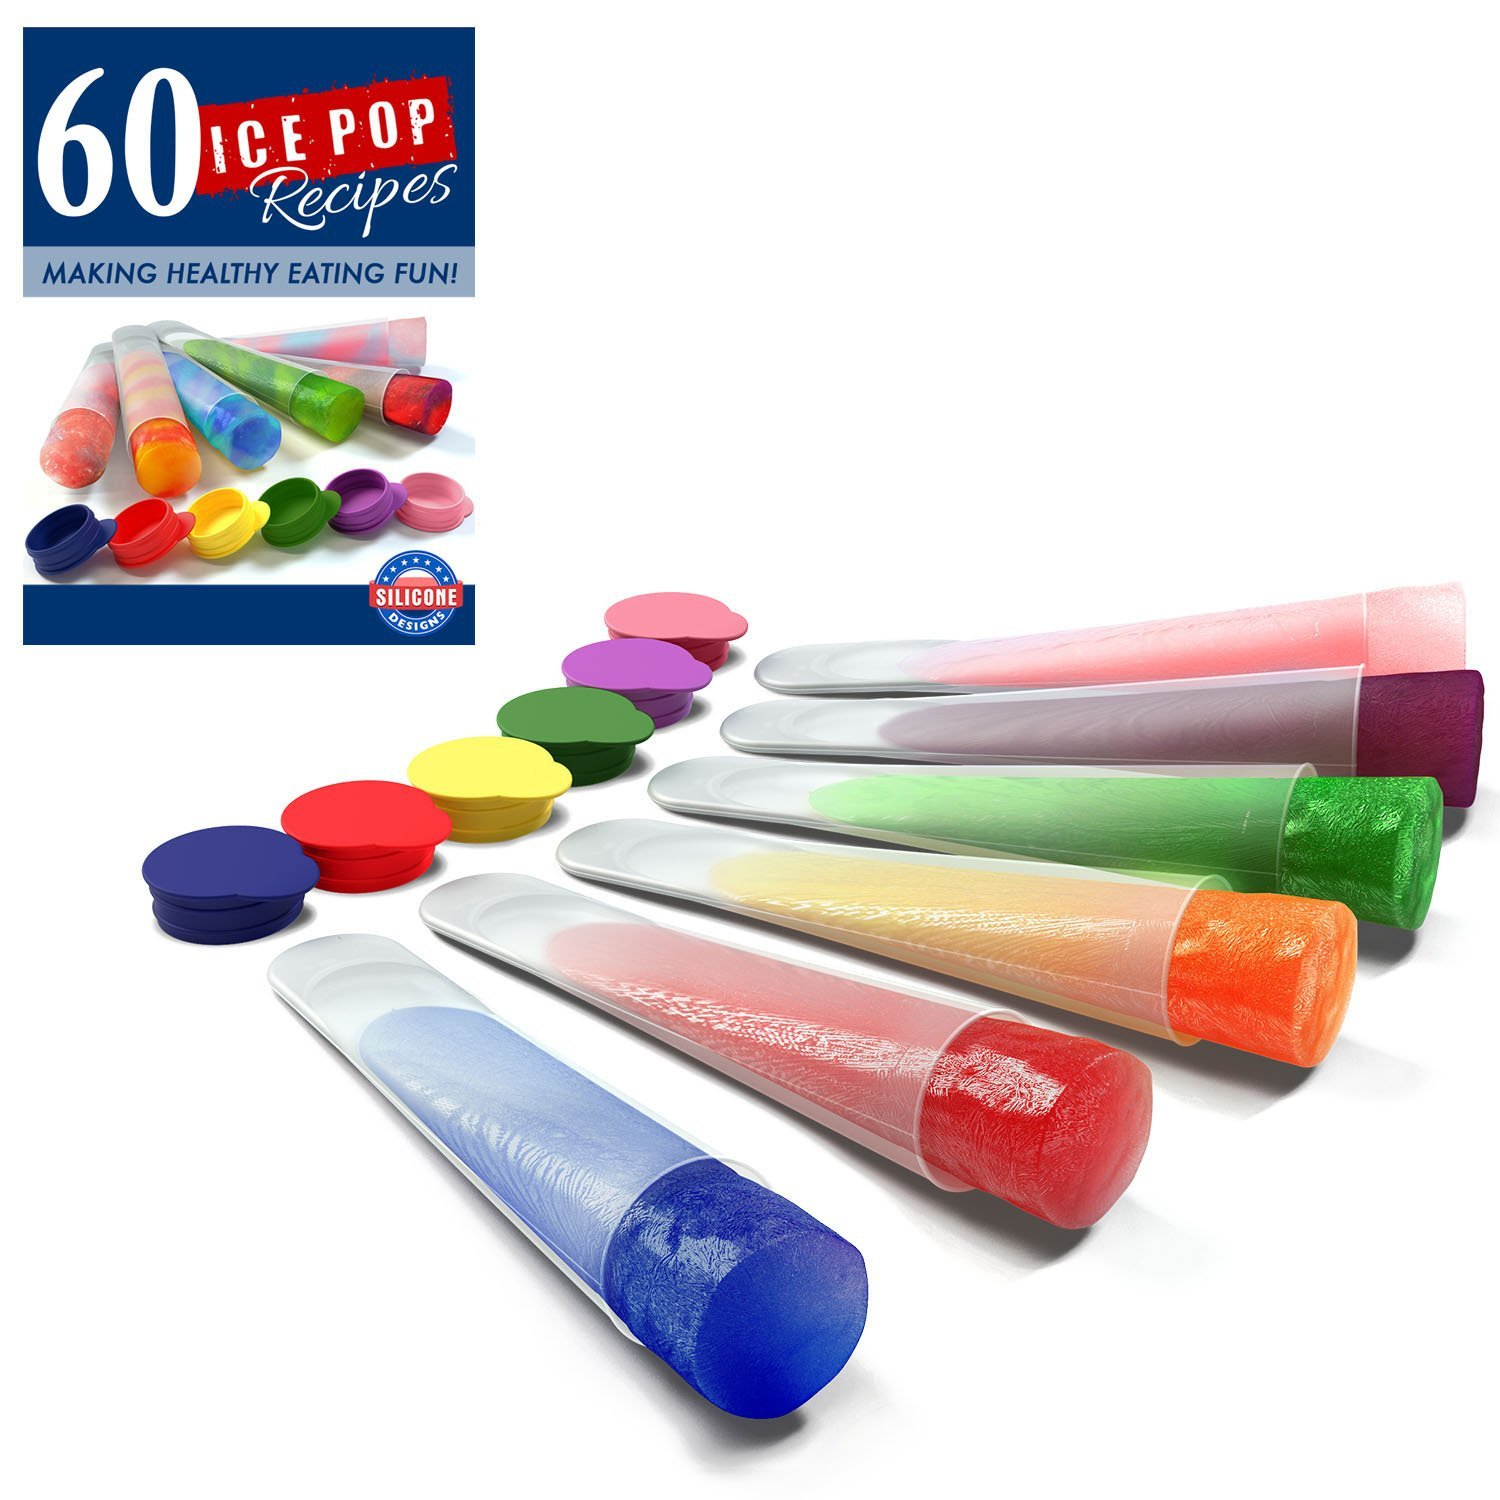 Silicone Ice Pop Molds (Set of 6) Just $12.48 on Amazon! (Includes 60 Recipes Ebook)